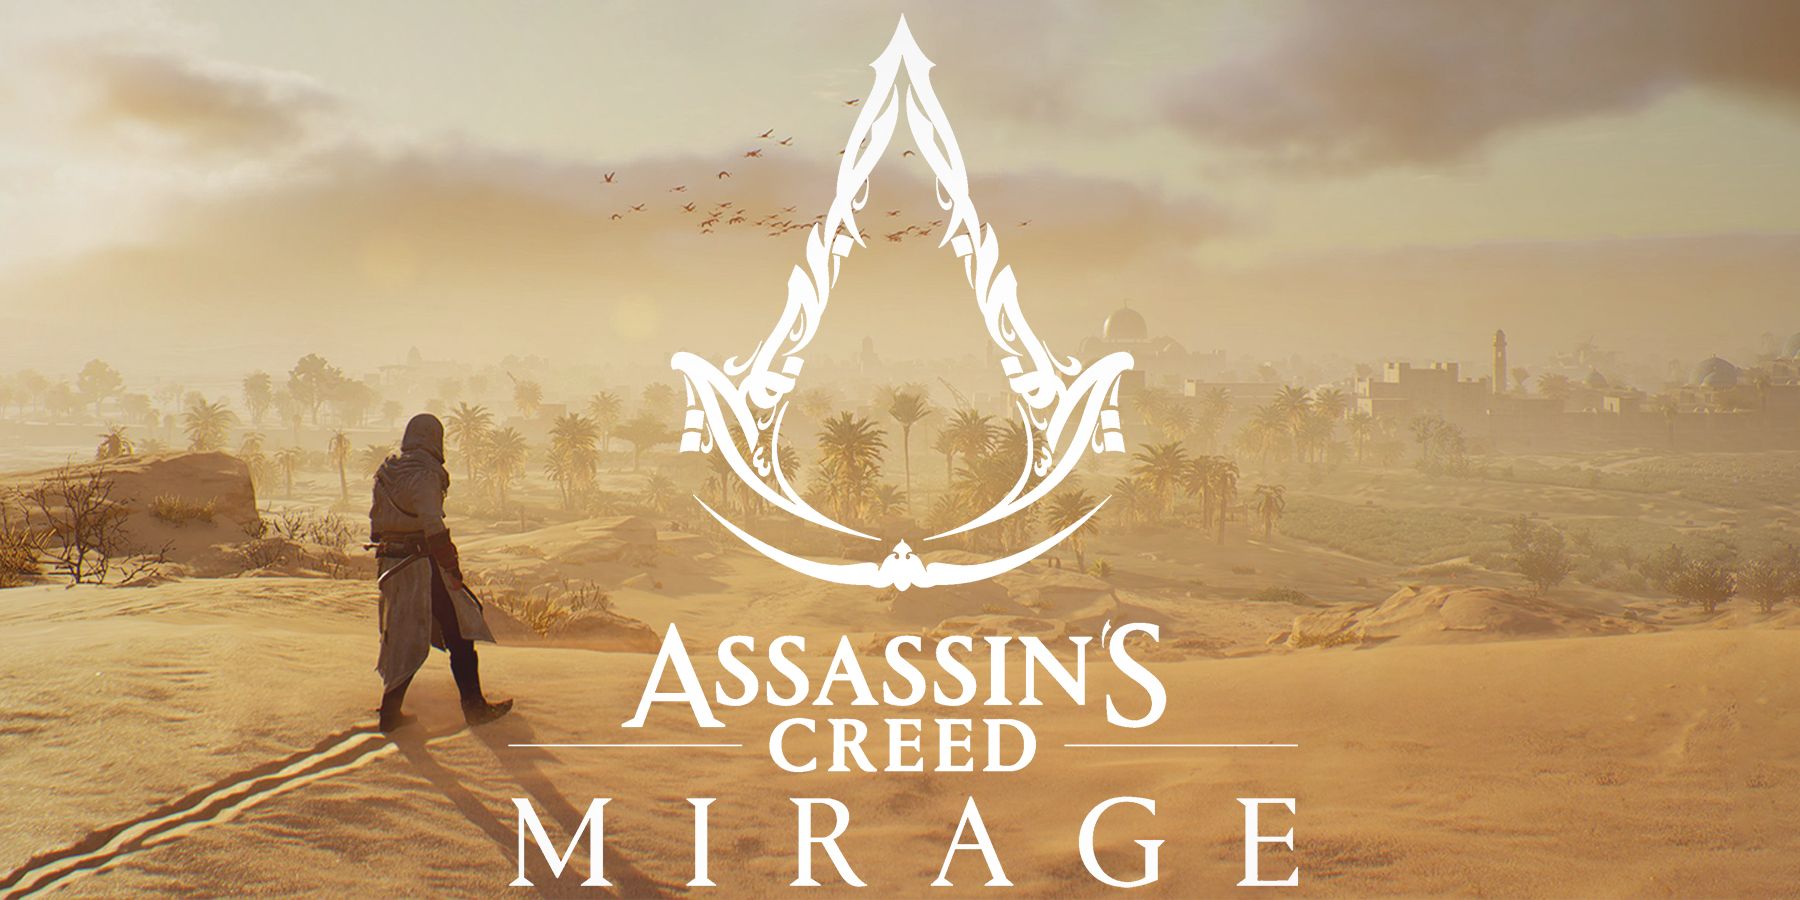 Assassin's Creed Mirage opening sequence Baghdad screenshot with game logo